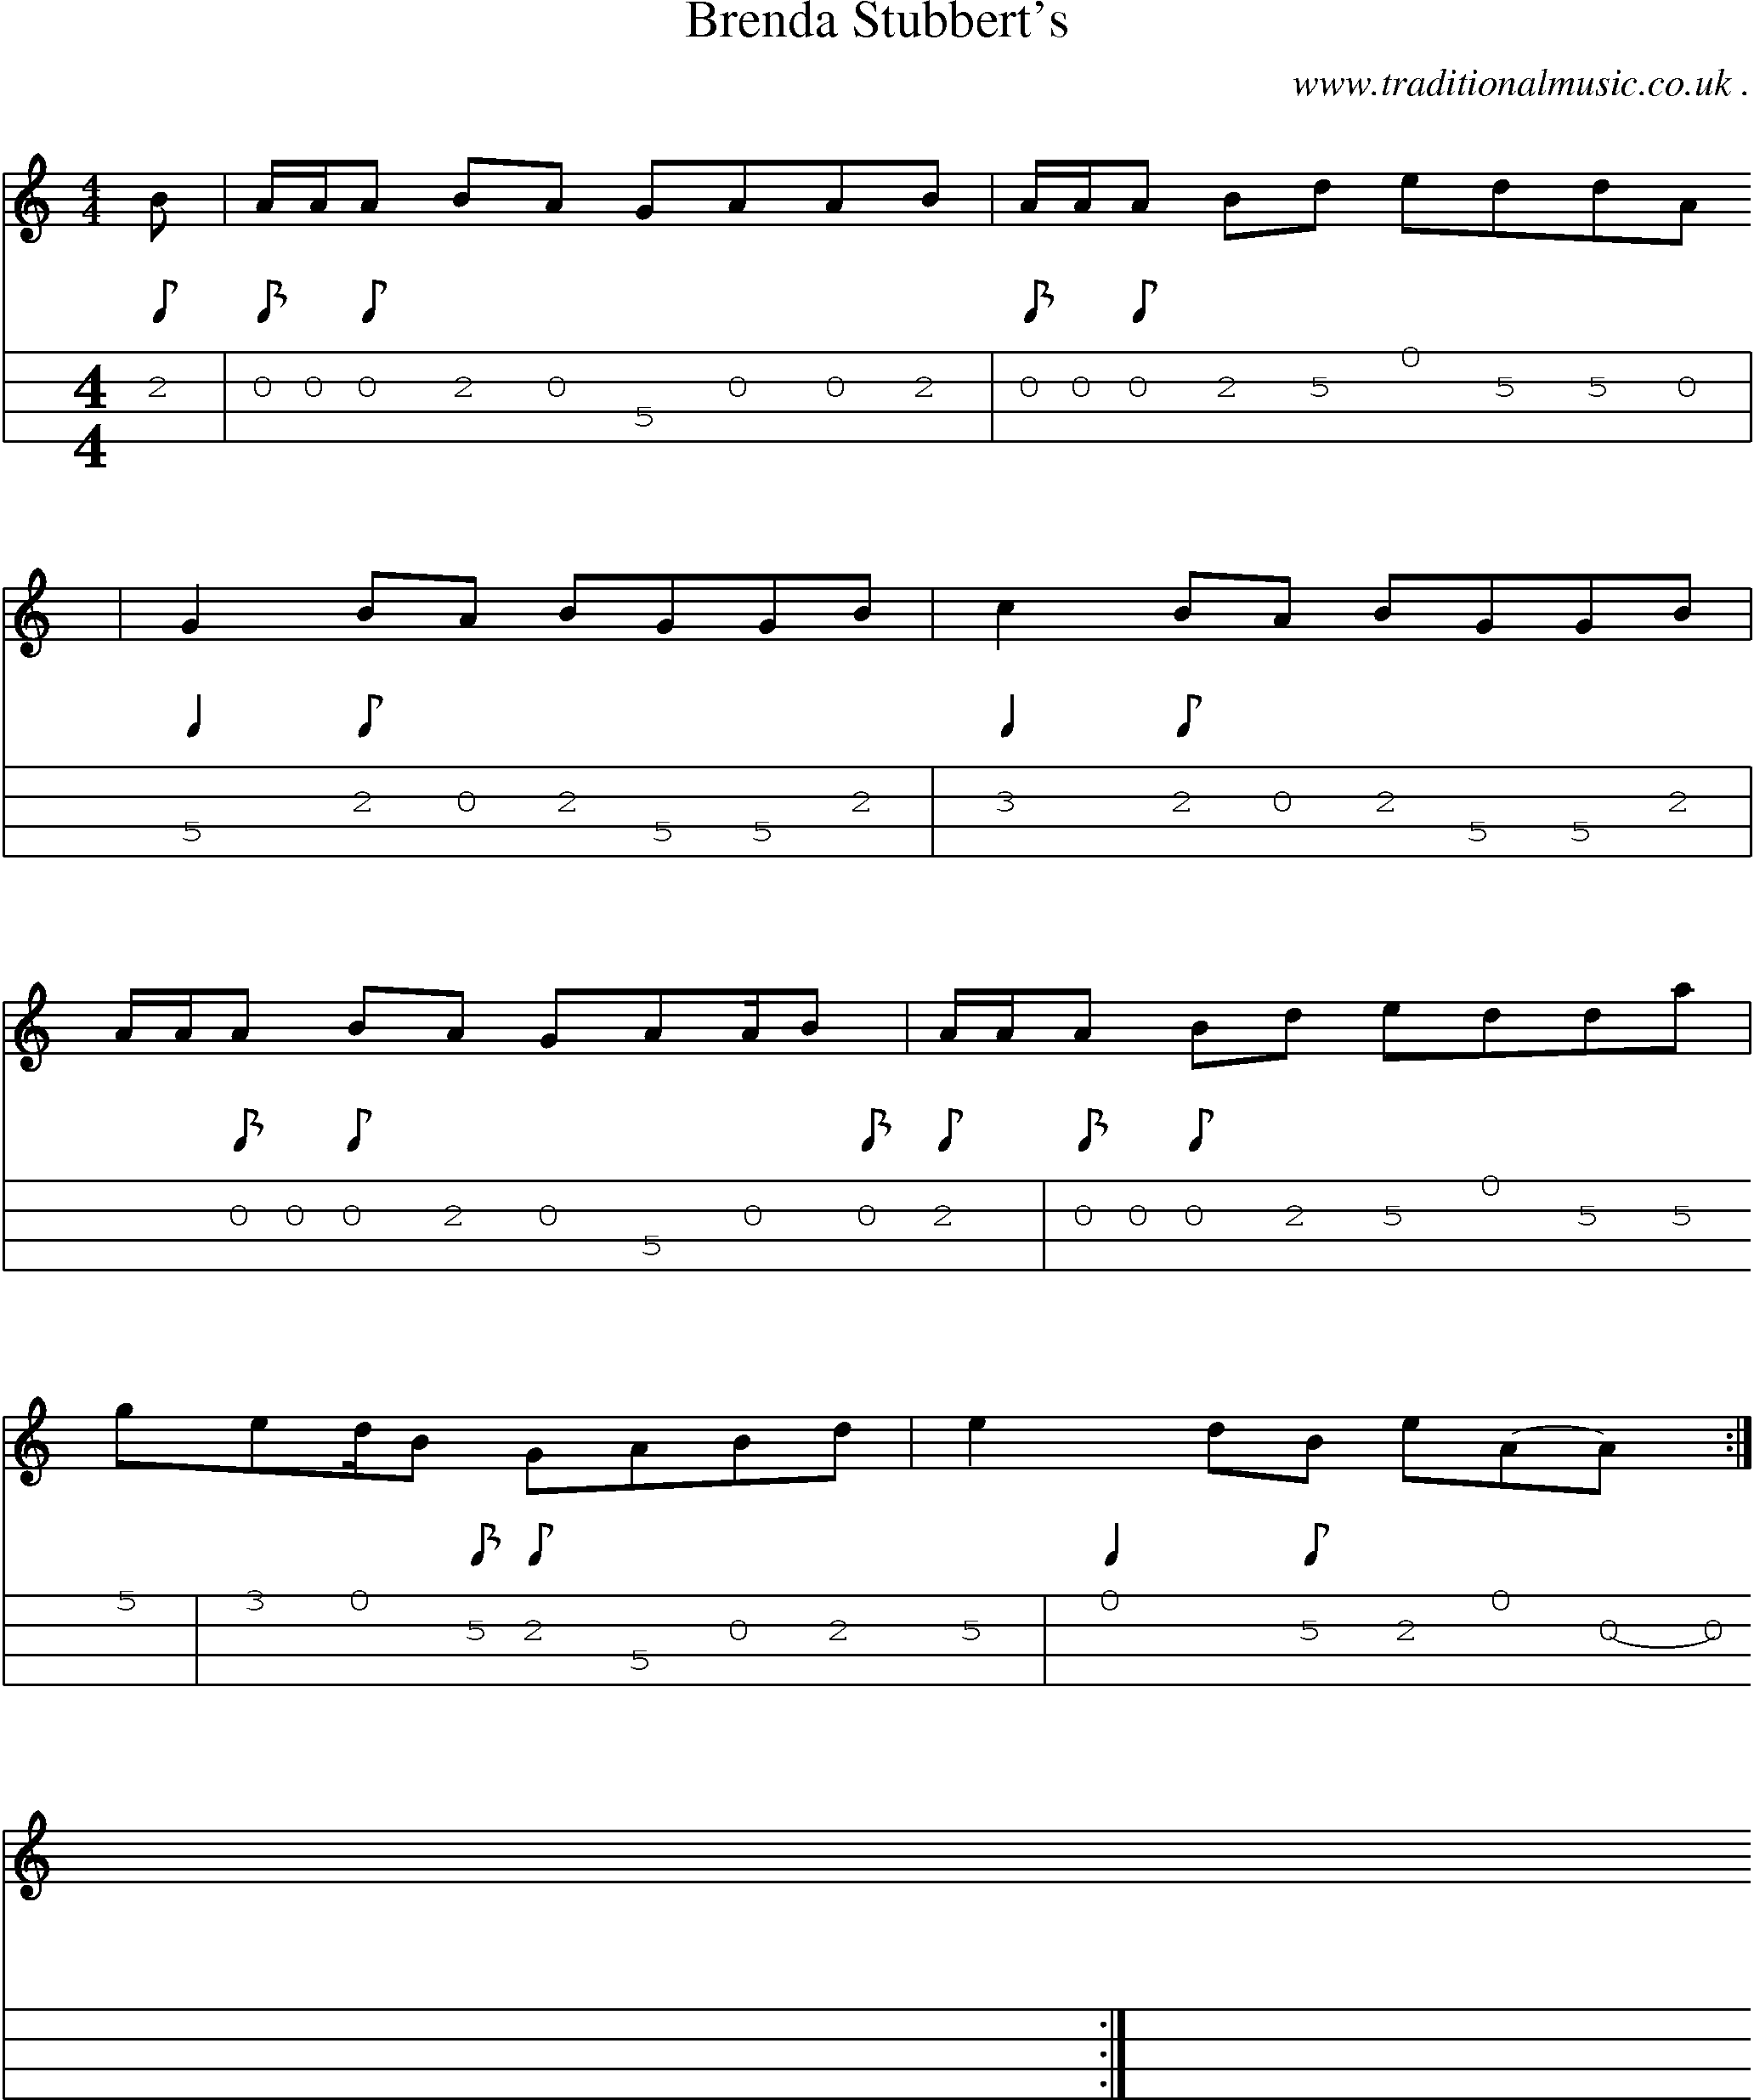 Sheet-music  score, Chords and Mandolin Tabs for Brenda Stubberts